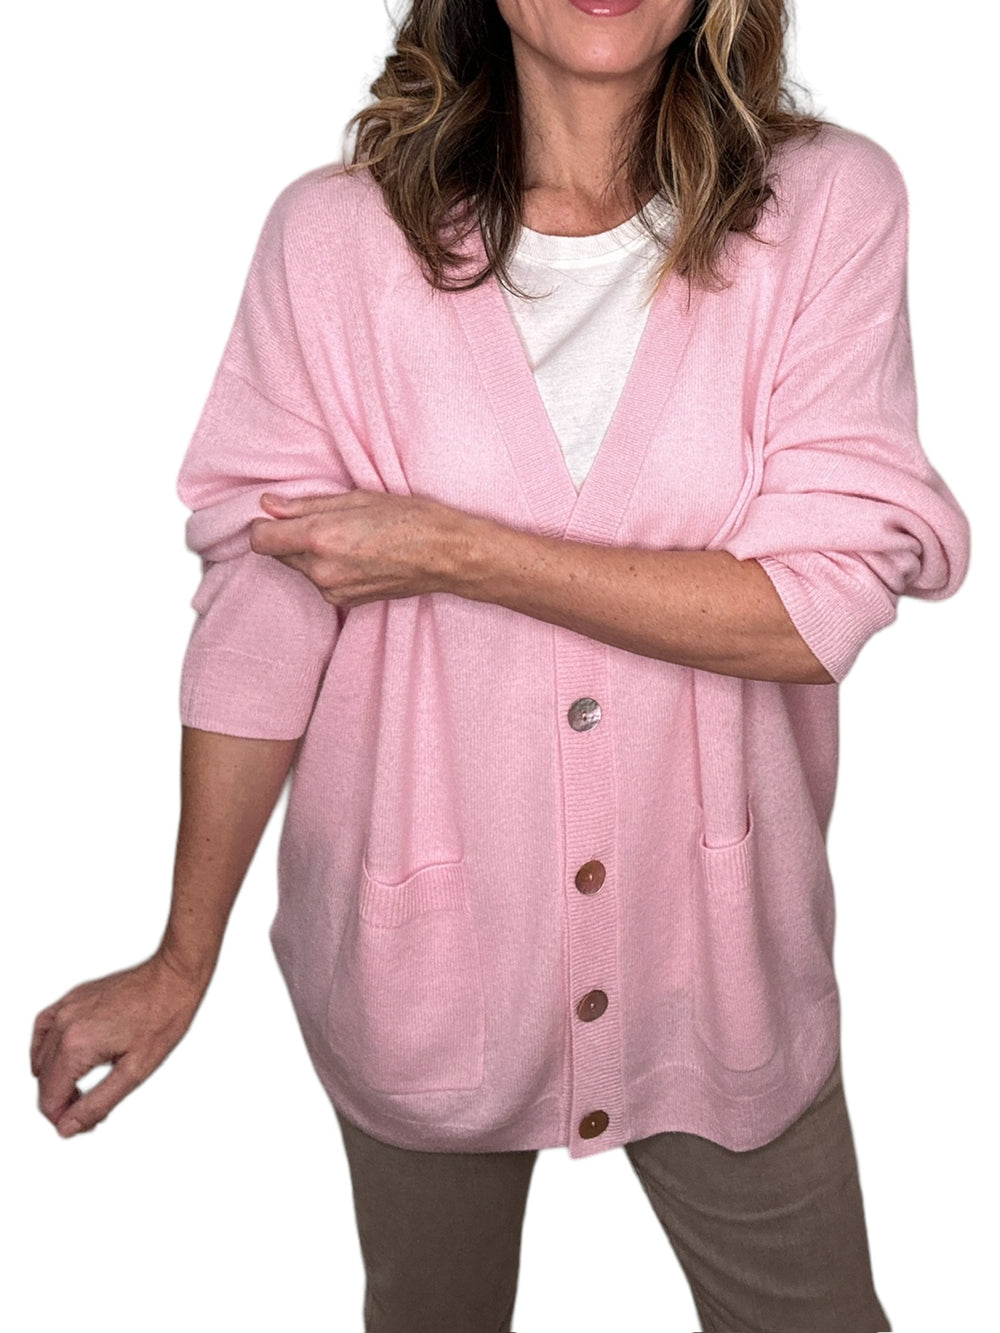 CANGGU OVERSIZED CARDIGAN-CANDY FLOSS - Kingfisher Road - Online Boutique